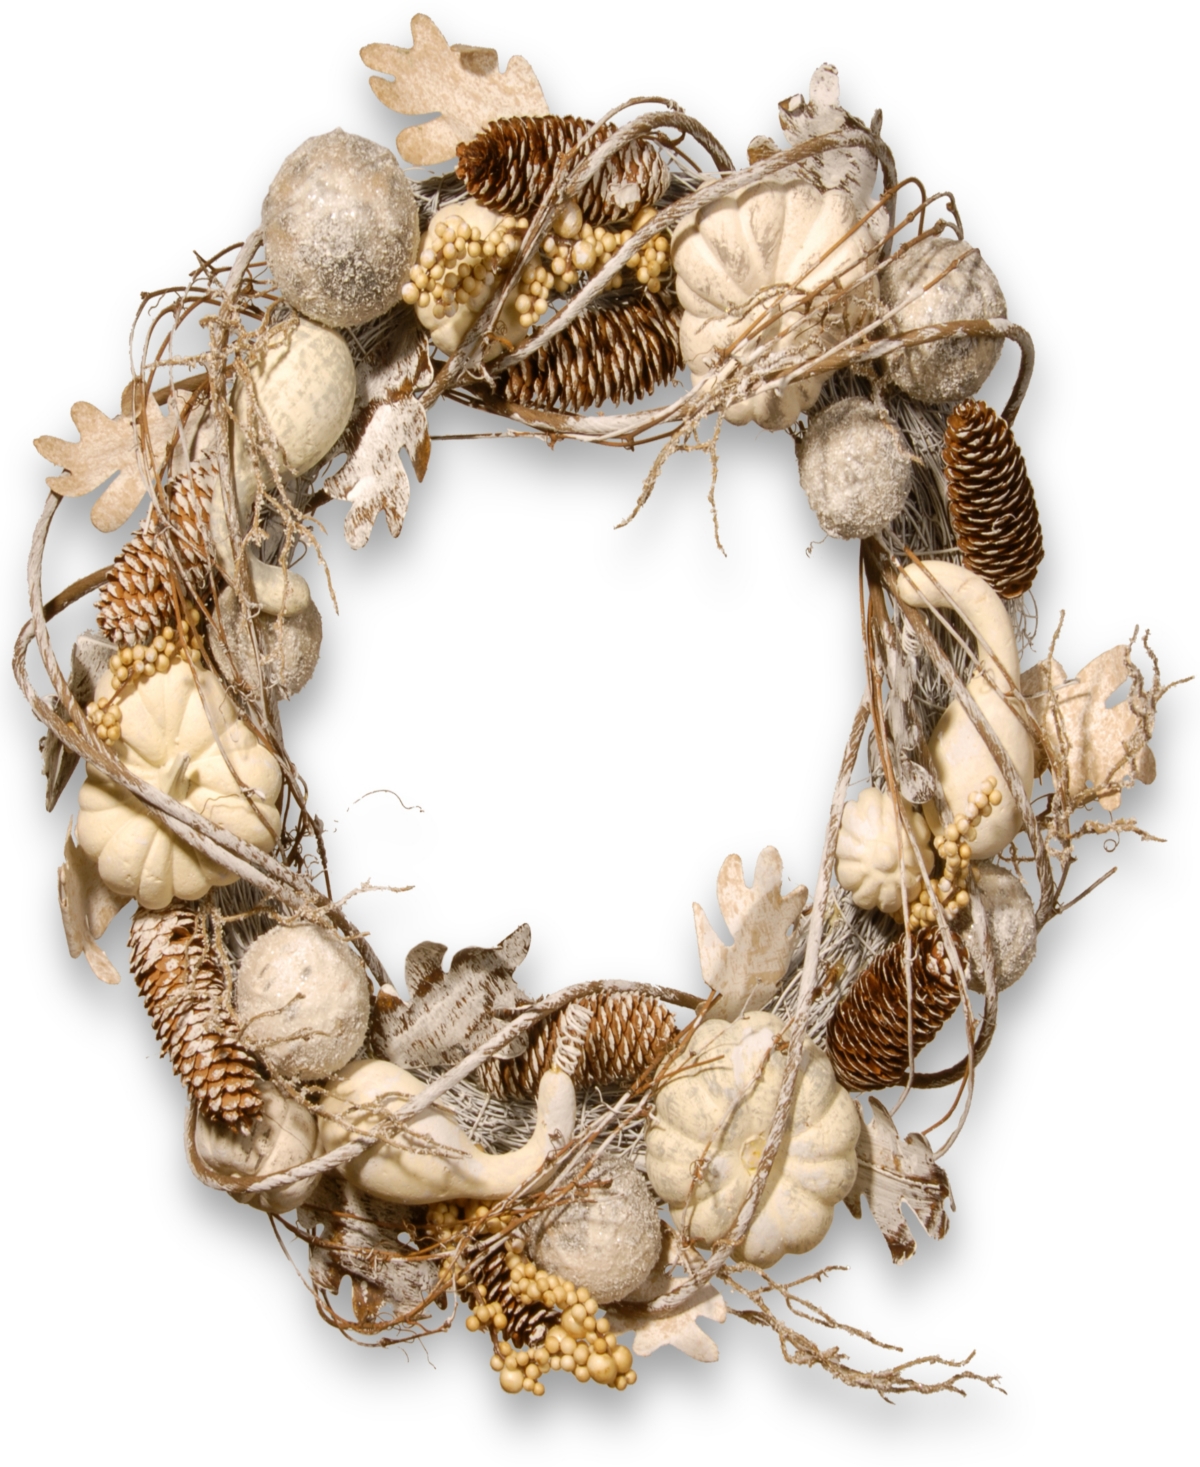 20" Artificial Autumn Wreath, White, Decorated with Pumpkins, Gourds, Pinecones, Berry Clusters, Ball Ornaments, Oak Leaves - Wh